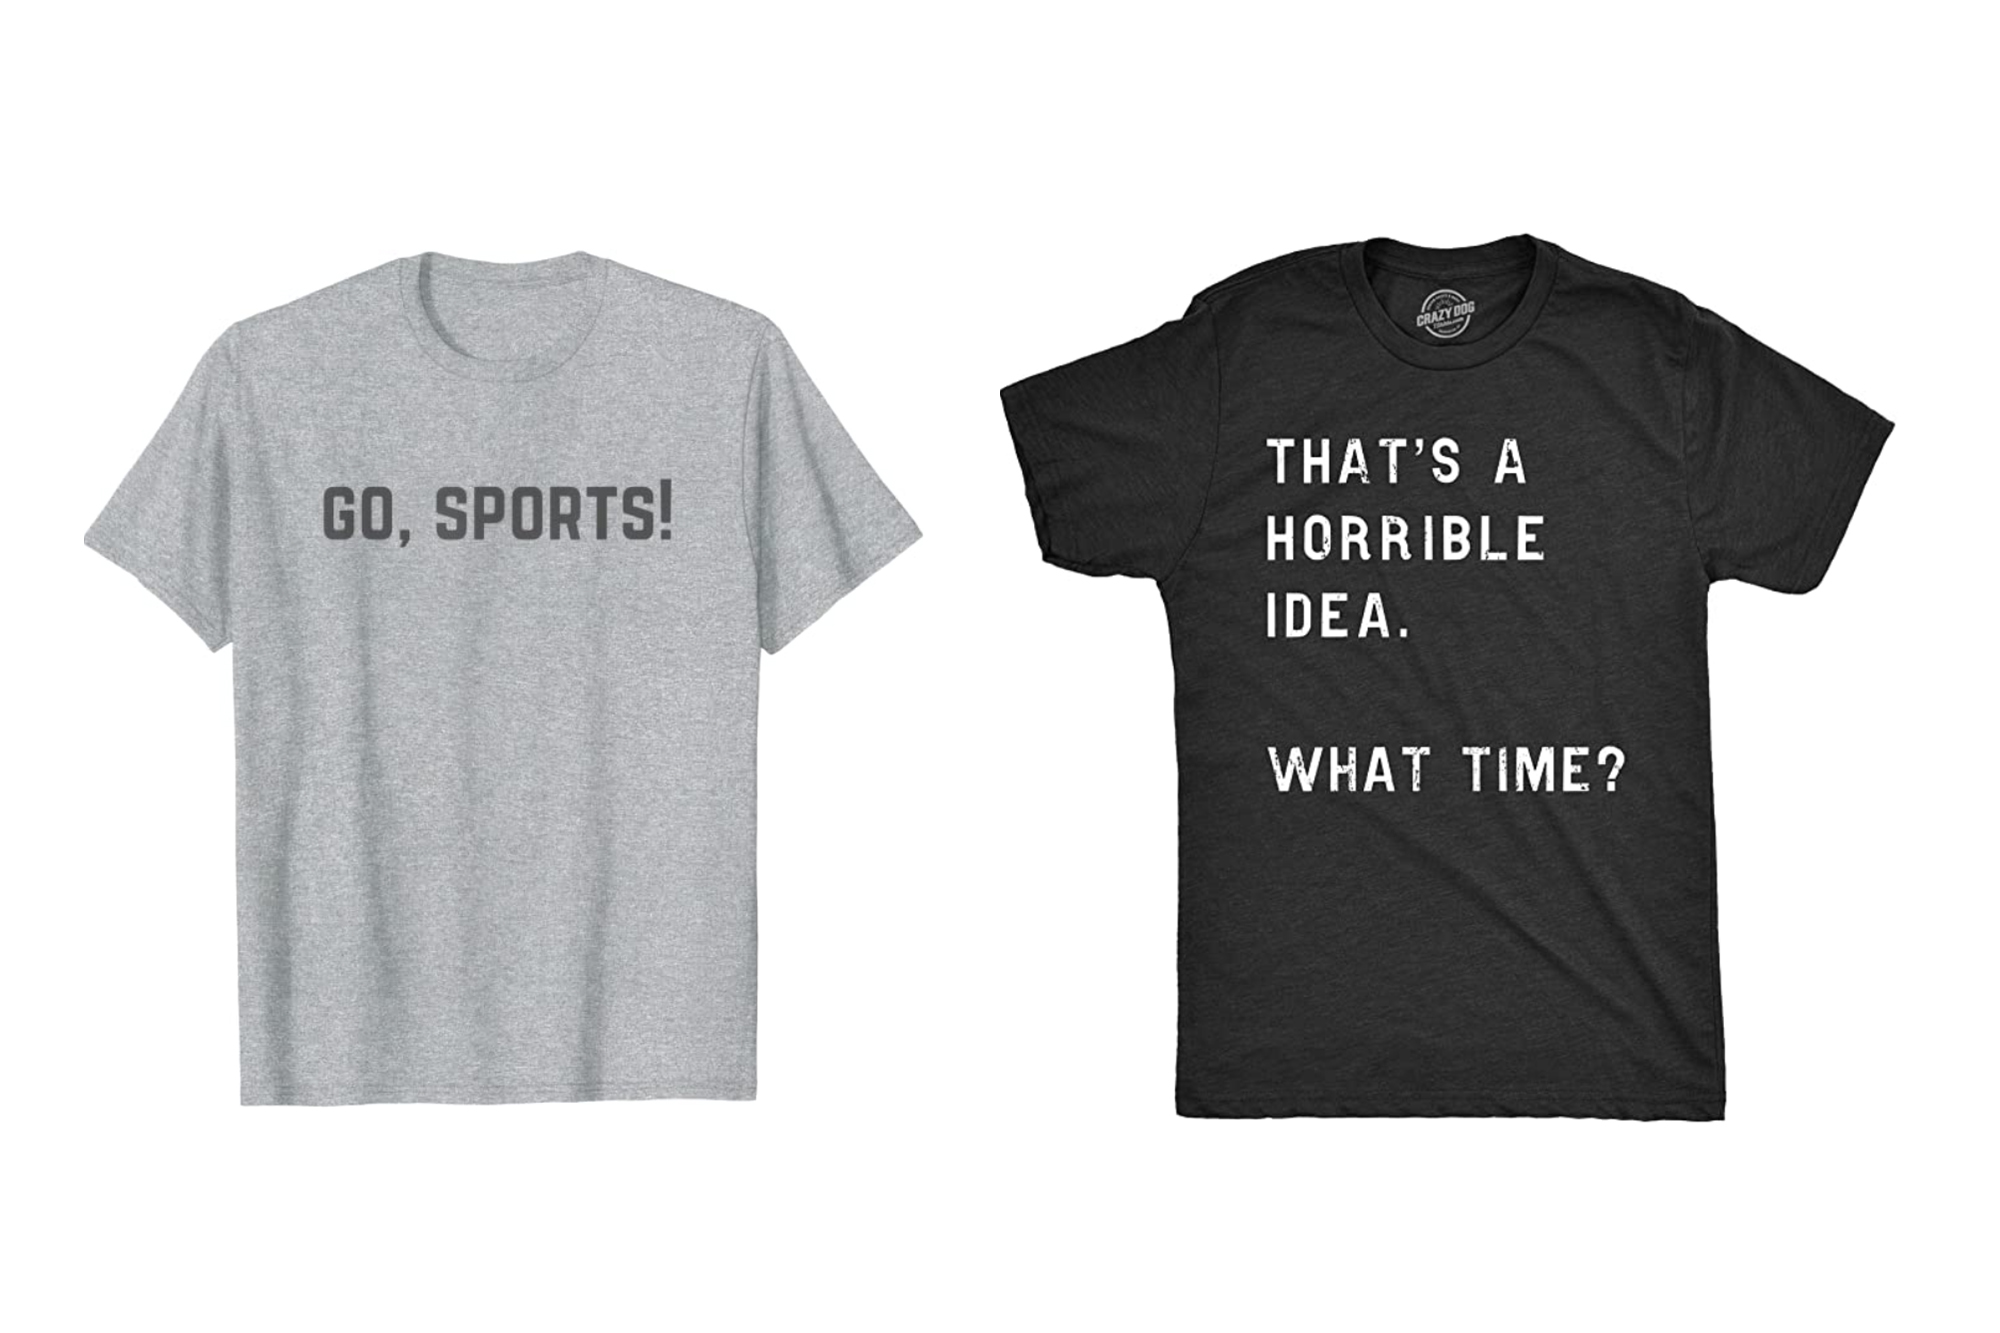 5 Sarcastic T-Shirts That Will Great Funny Holiday Gifts